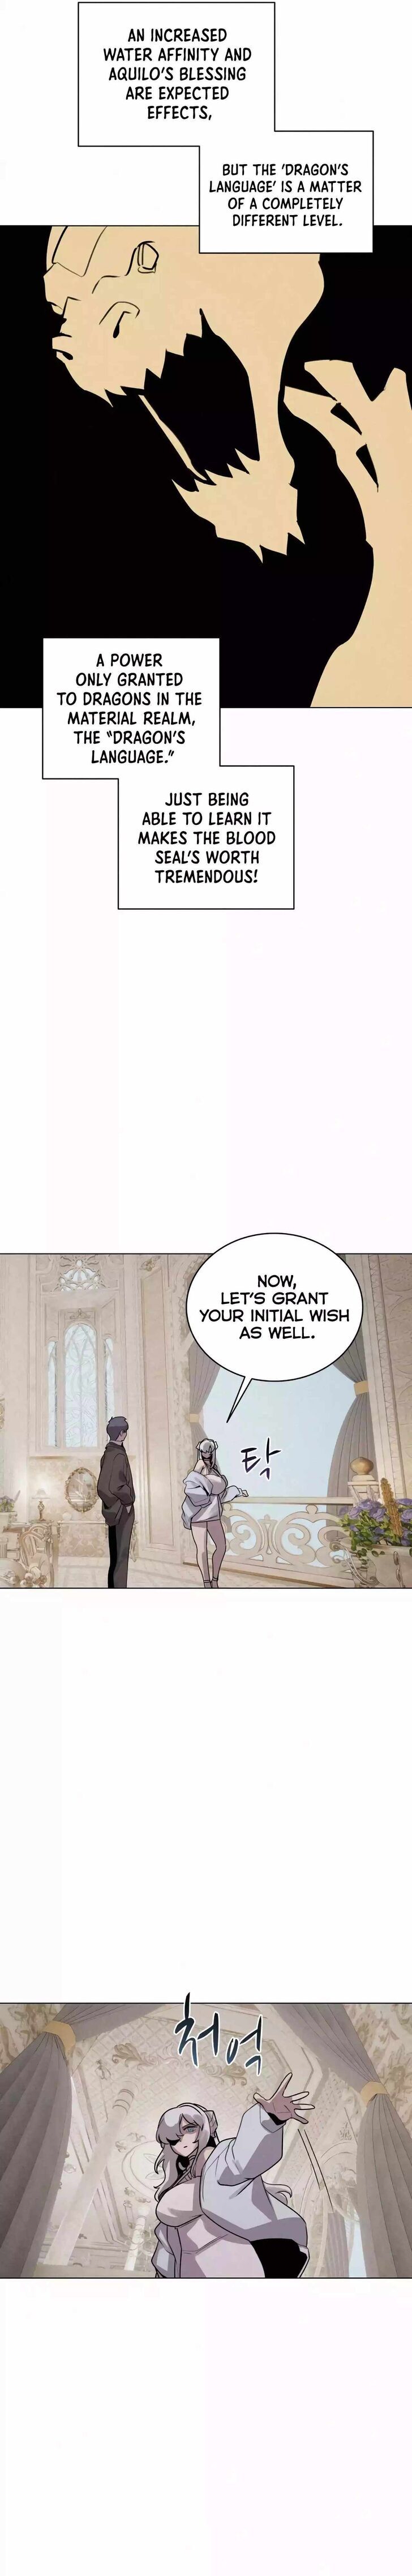 The Book Eating Magician Ch.114